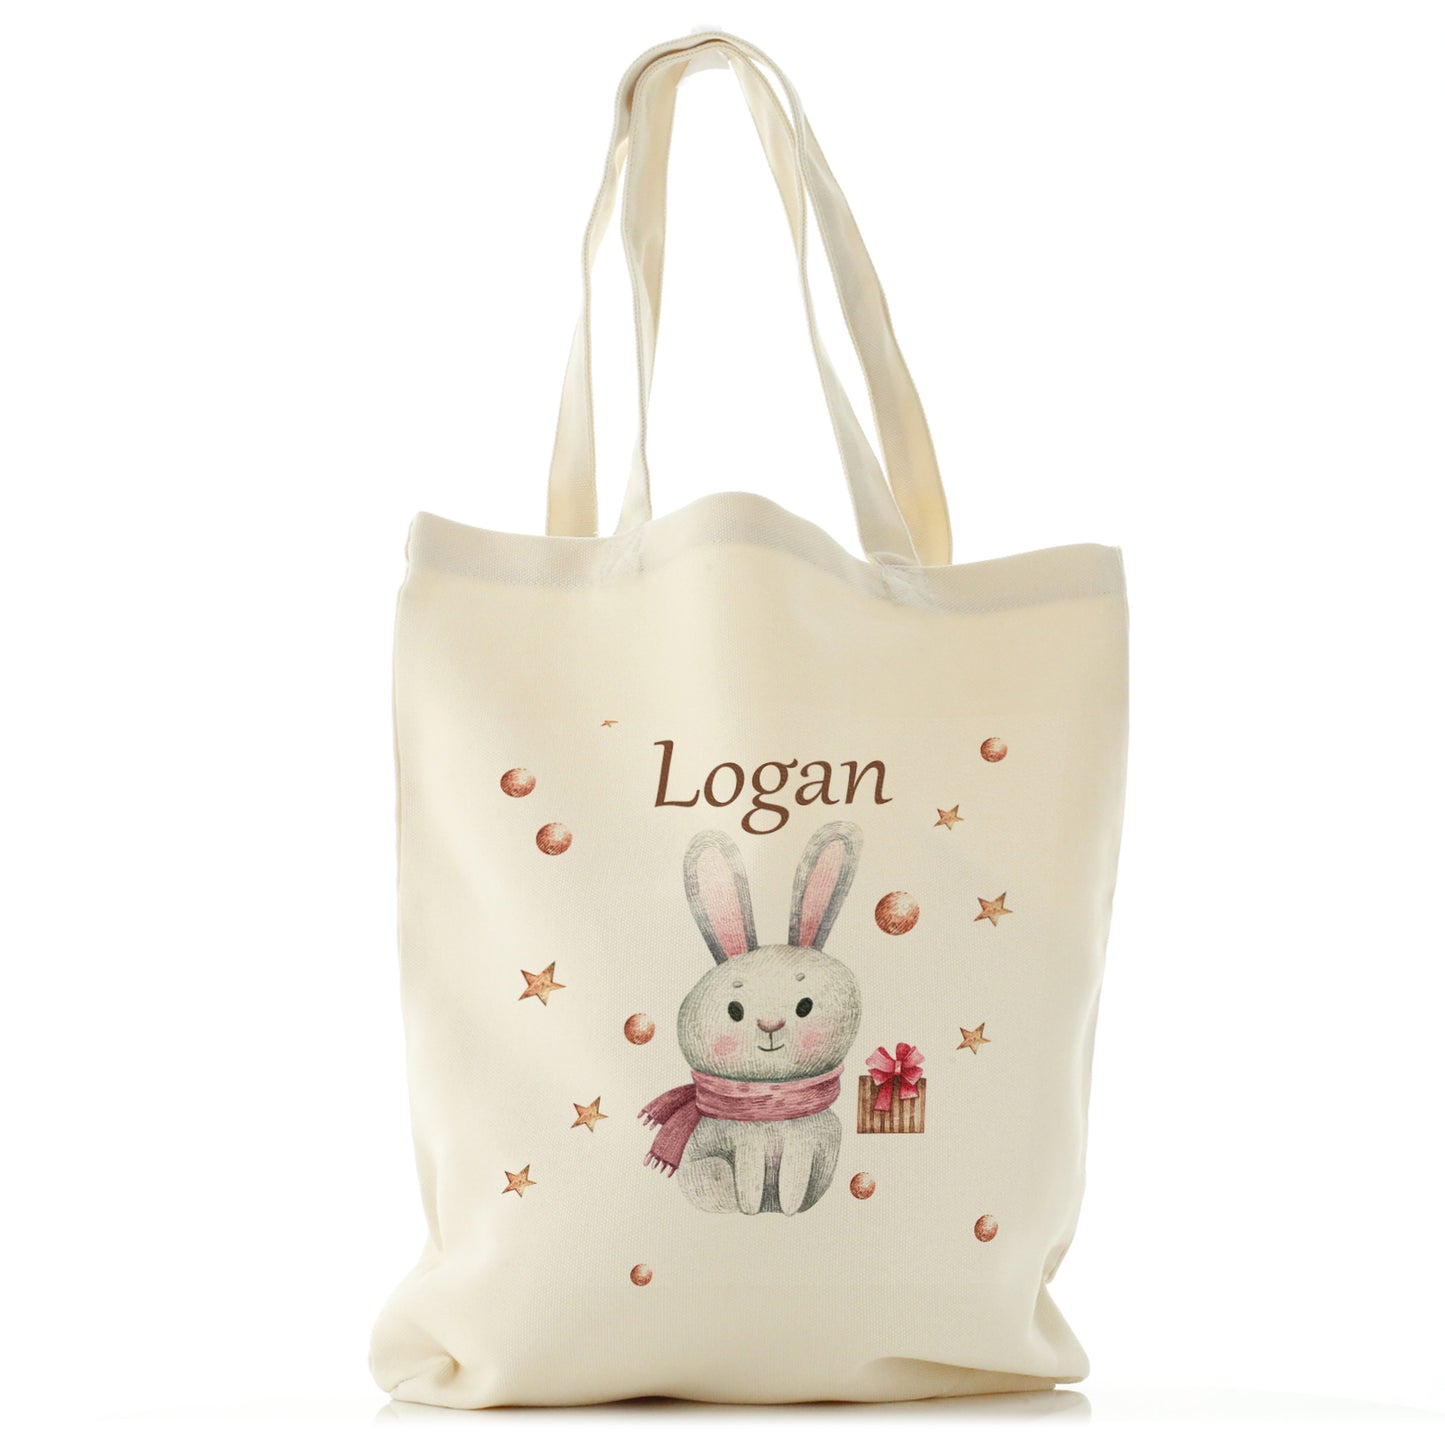 Personalised Canvas Tote Bag with Cute Text and Gift Giving Grey Rabbit